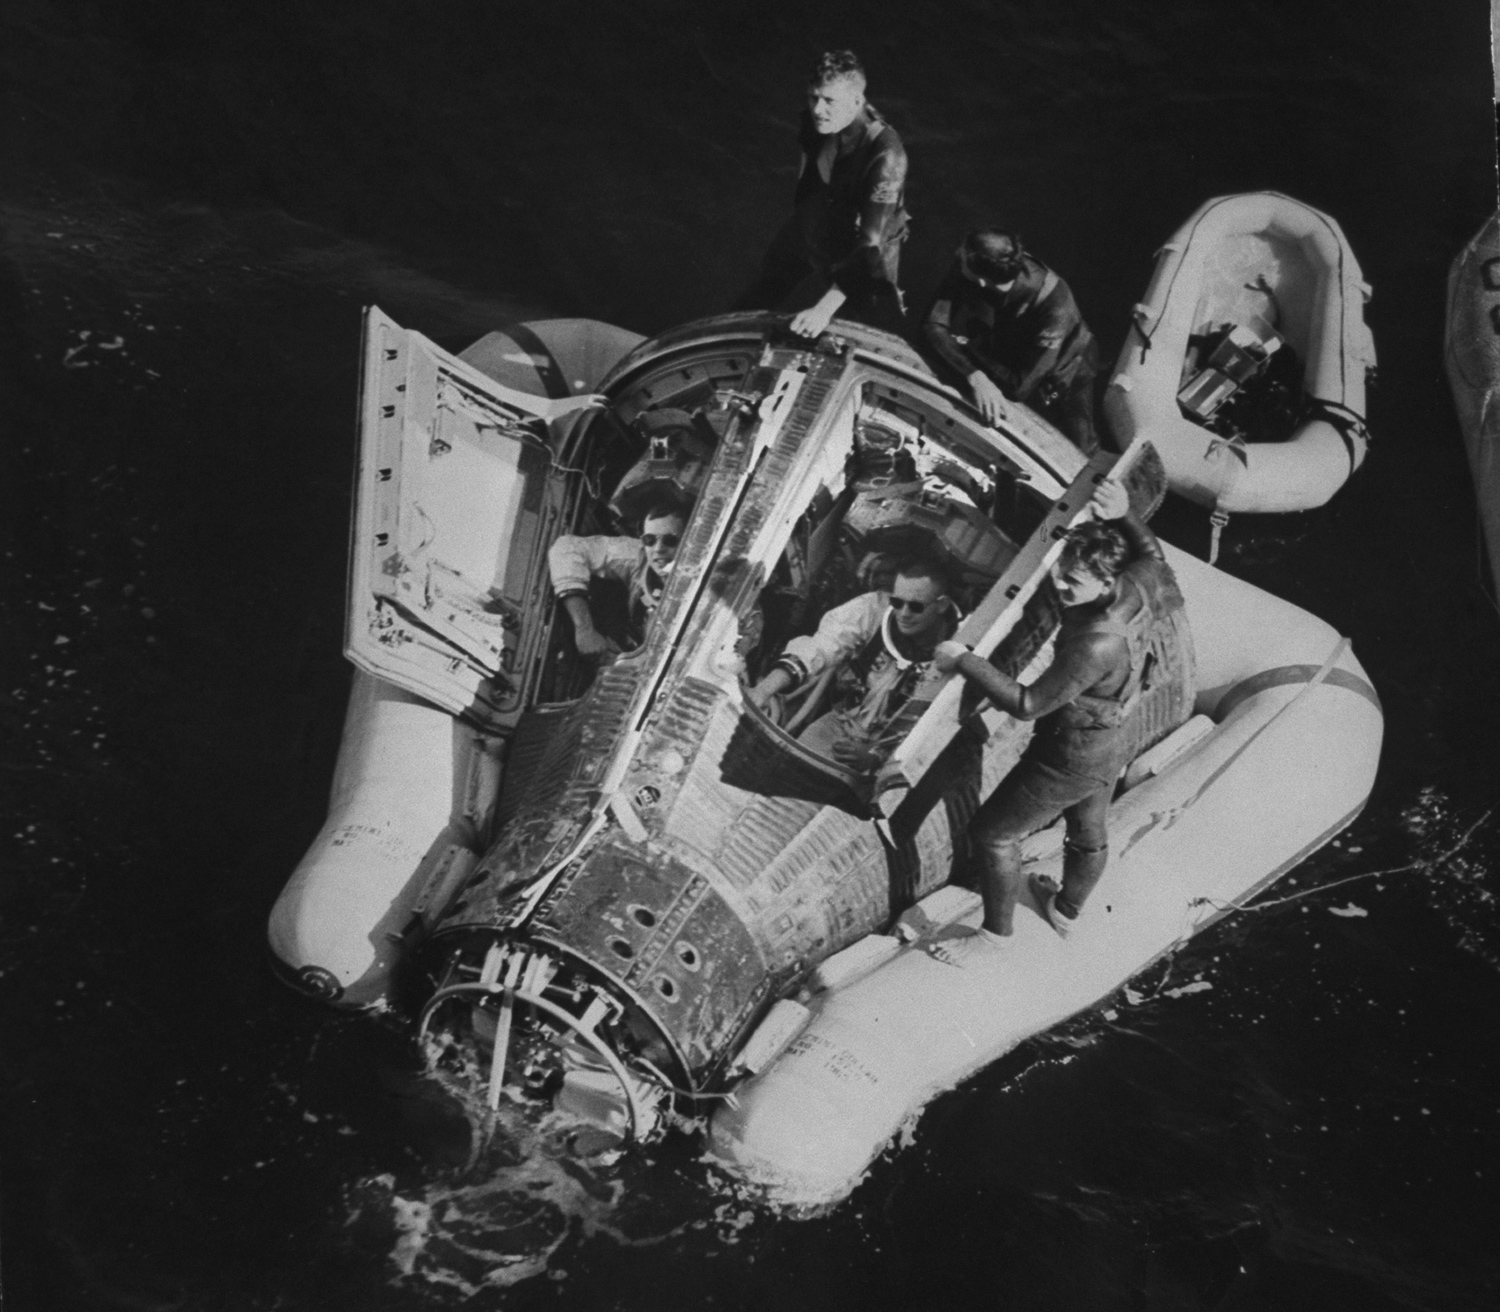 Gemini 8 astronauts Neil Armstrong and David Scott, floating in the Pacific after splashdown, 1966.